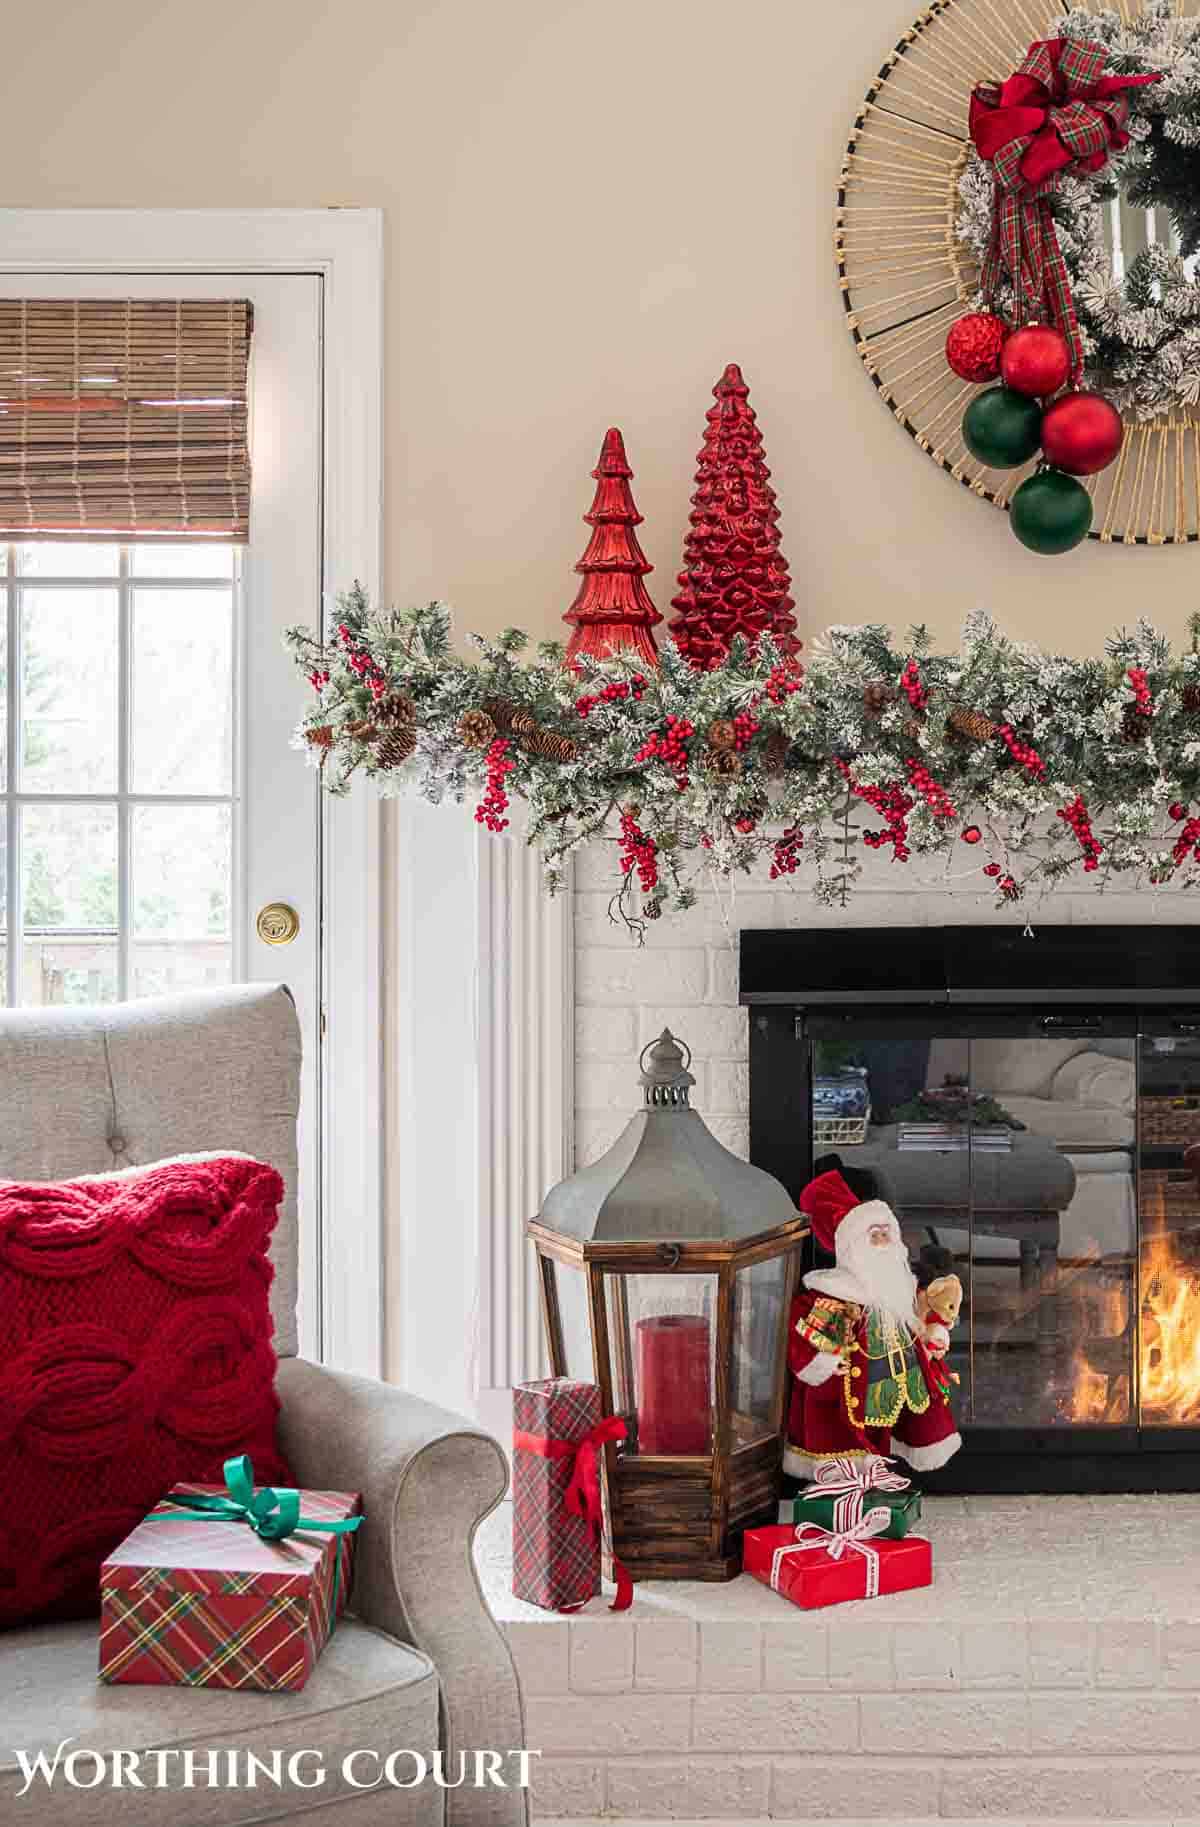 https://www.worthingcourtblog.com/wp-content/uploads/2022/12/red-and-green-Christmas-tree-red-and-green-Christmas-mantle-4.jpg